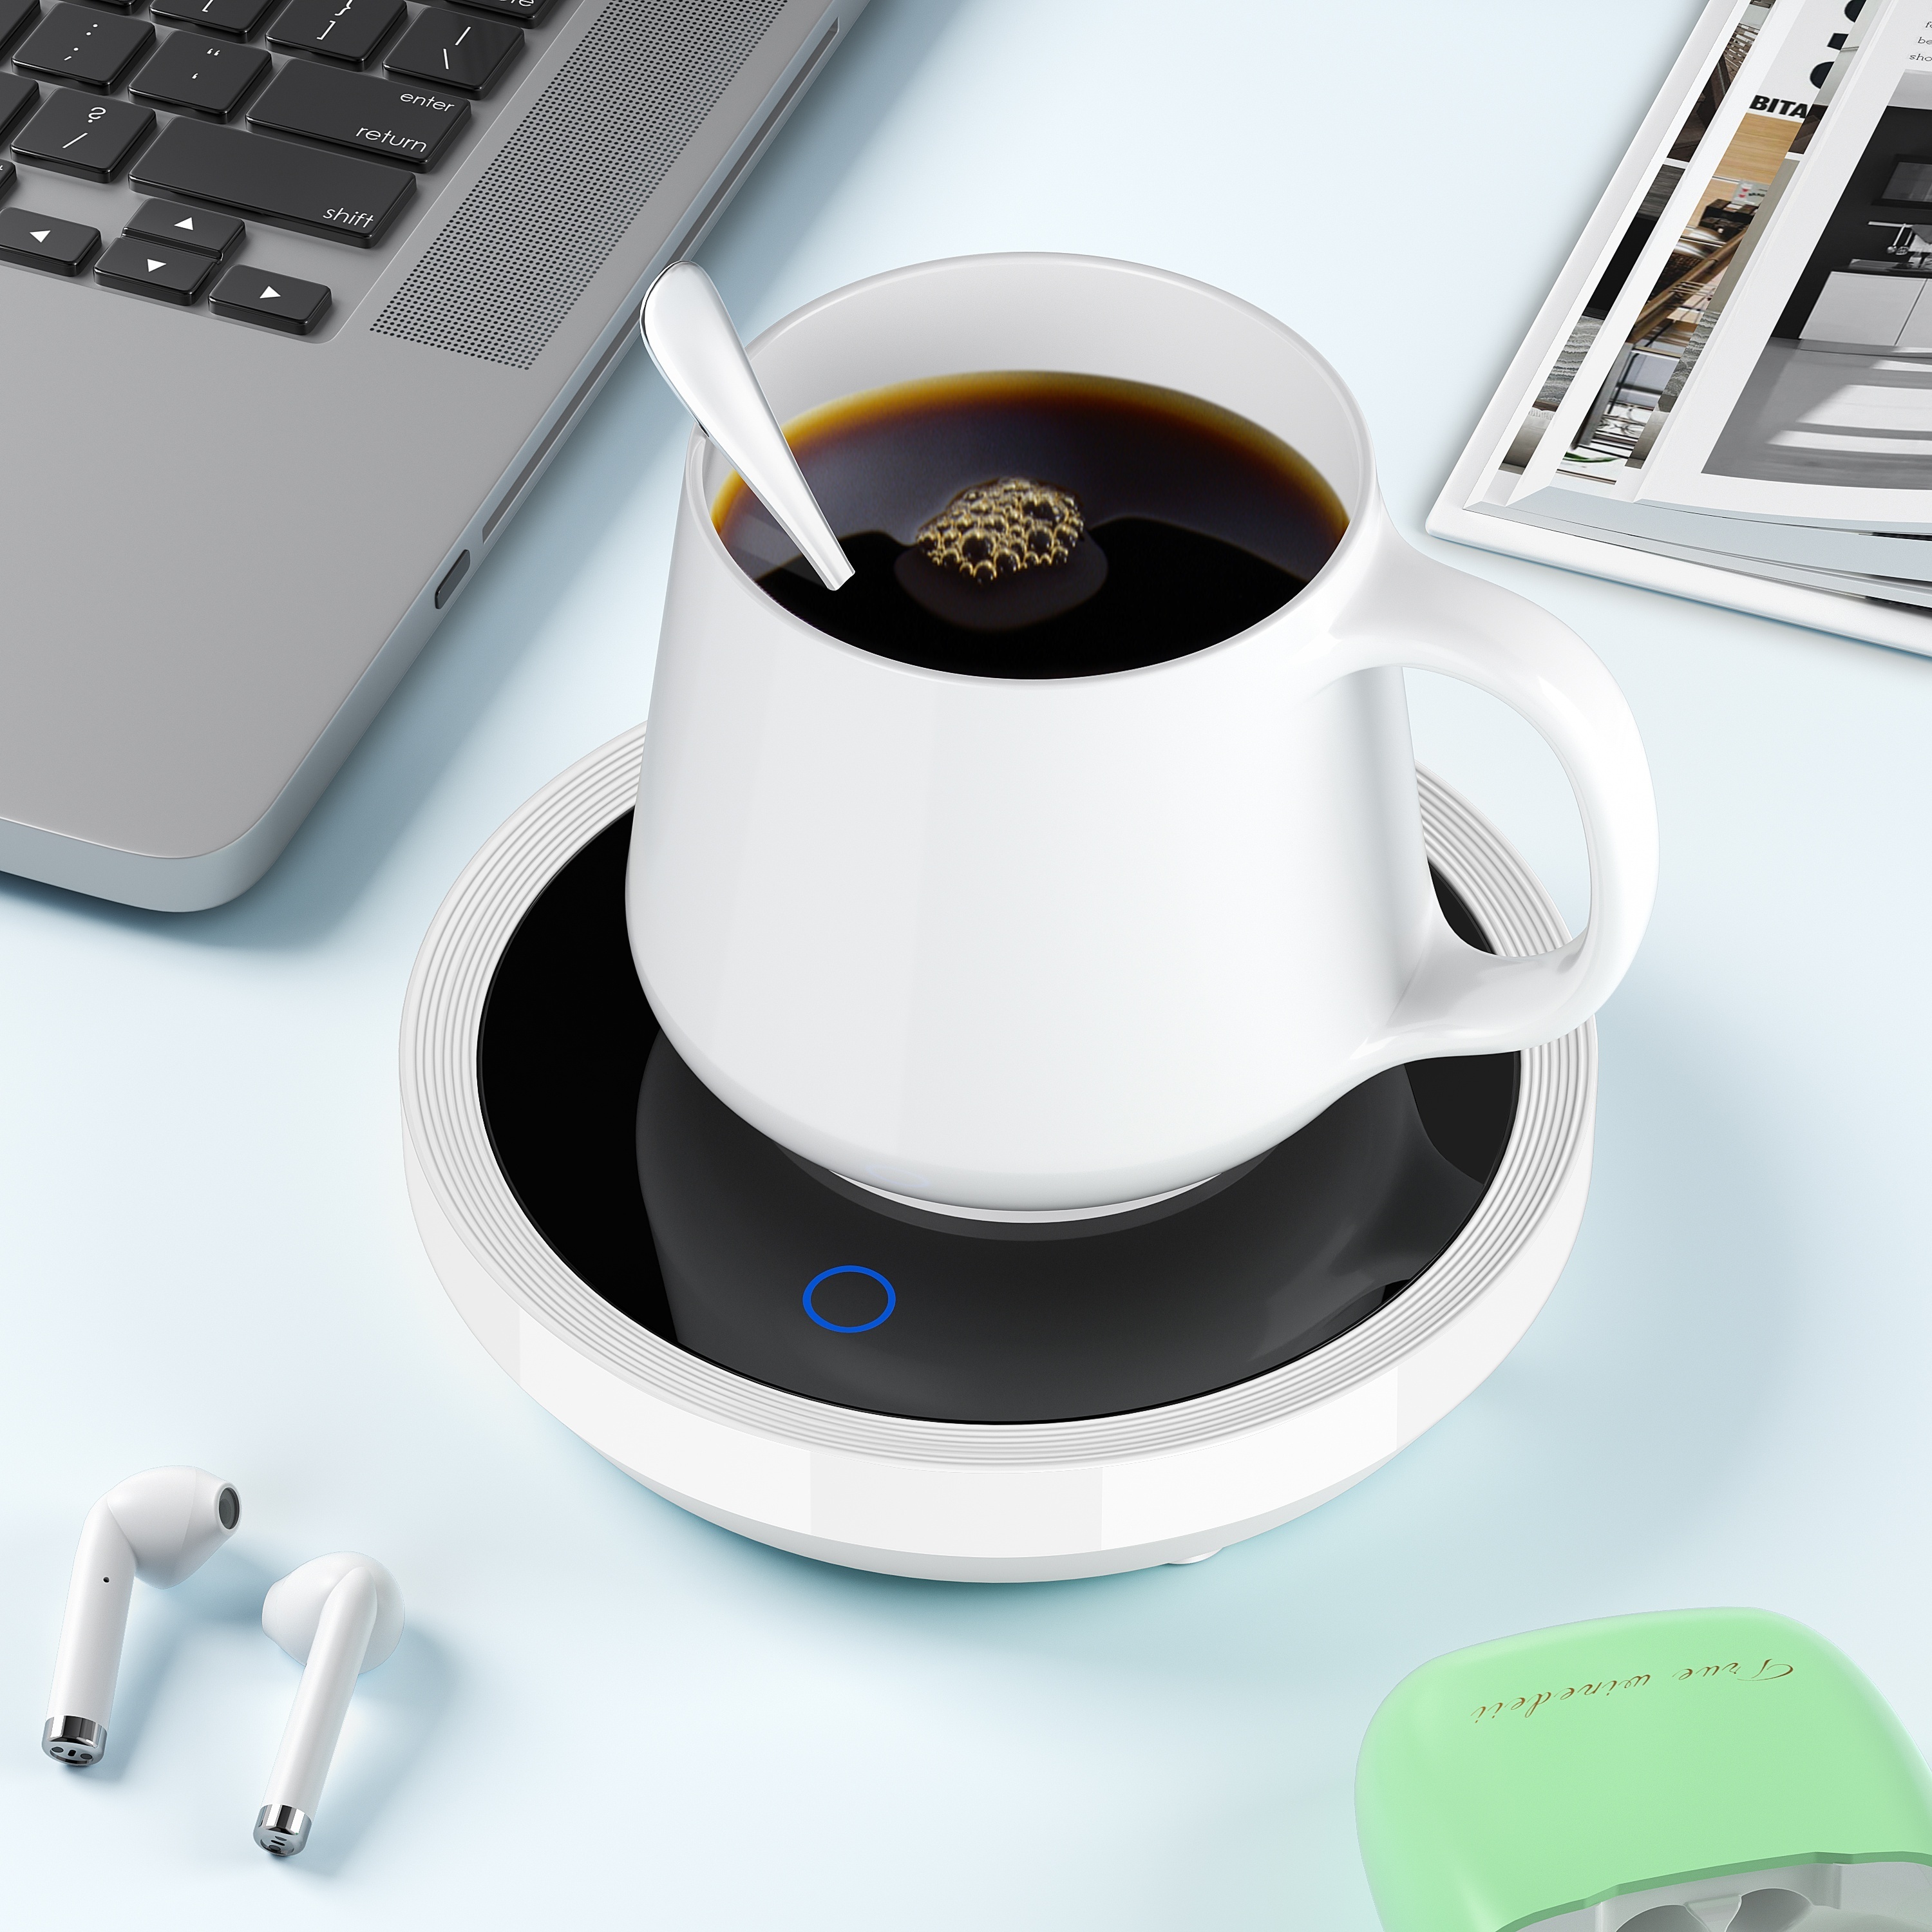  Coffee Mug Warmer Smart Cup Warmer for Office  Desk,Multifunction Electric Beverage Warmer Plate 2 in 1 Wireless Charger, USB Heating Coaster Drink Warmer for Cocoa, Tea, Milk: Home & Kitchen